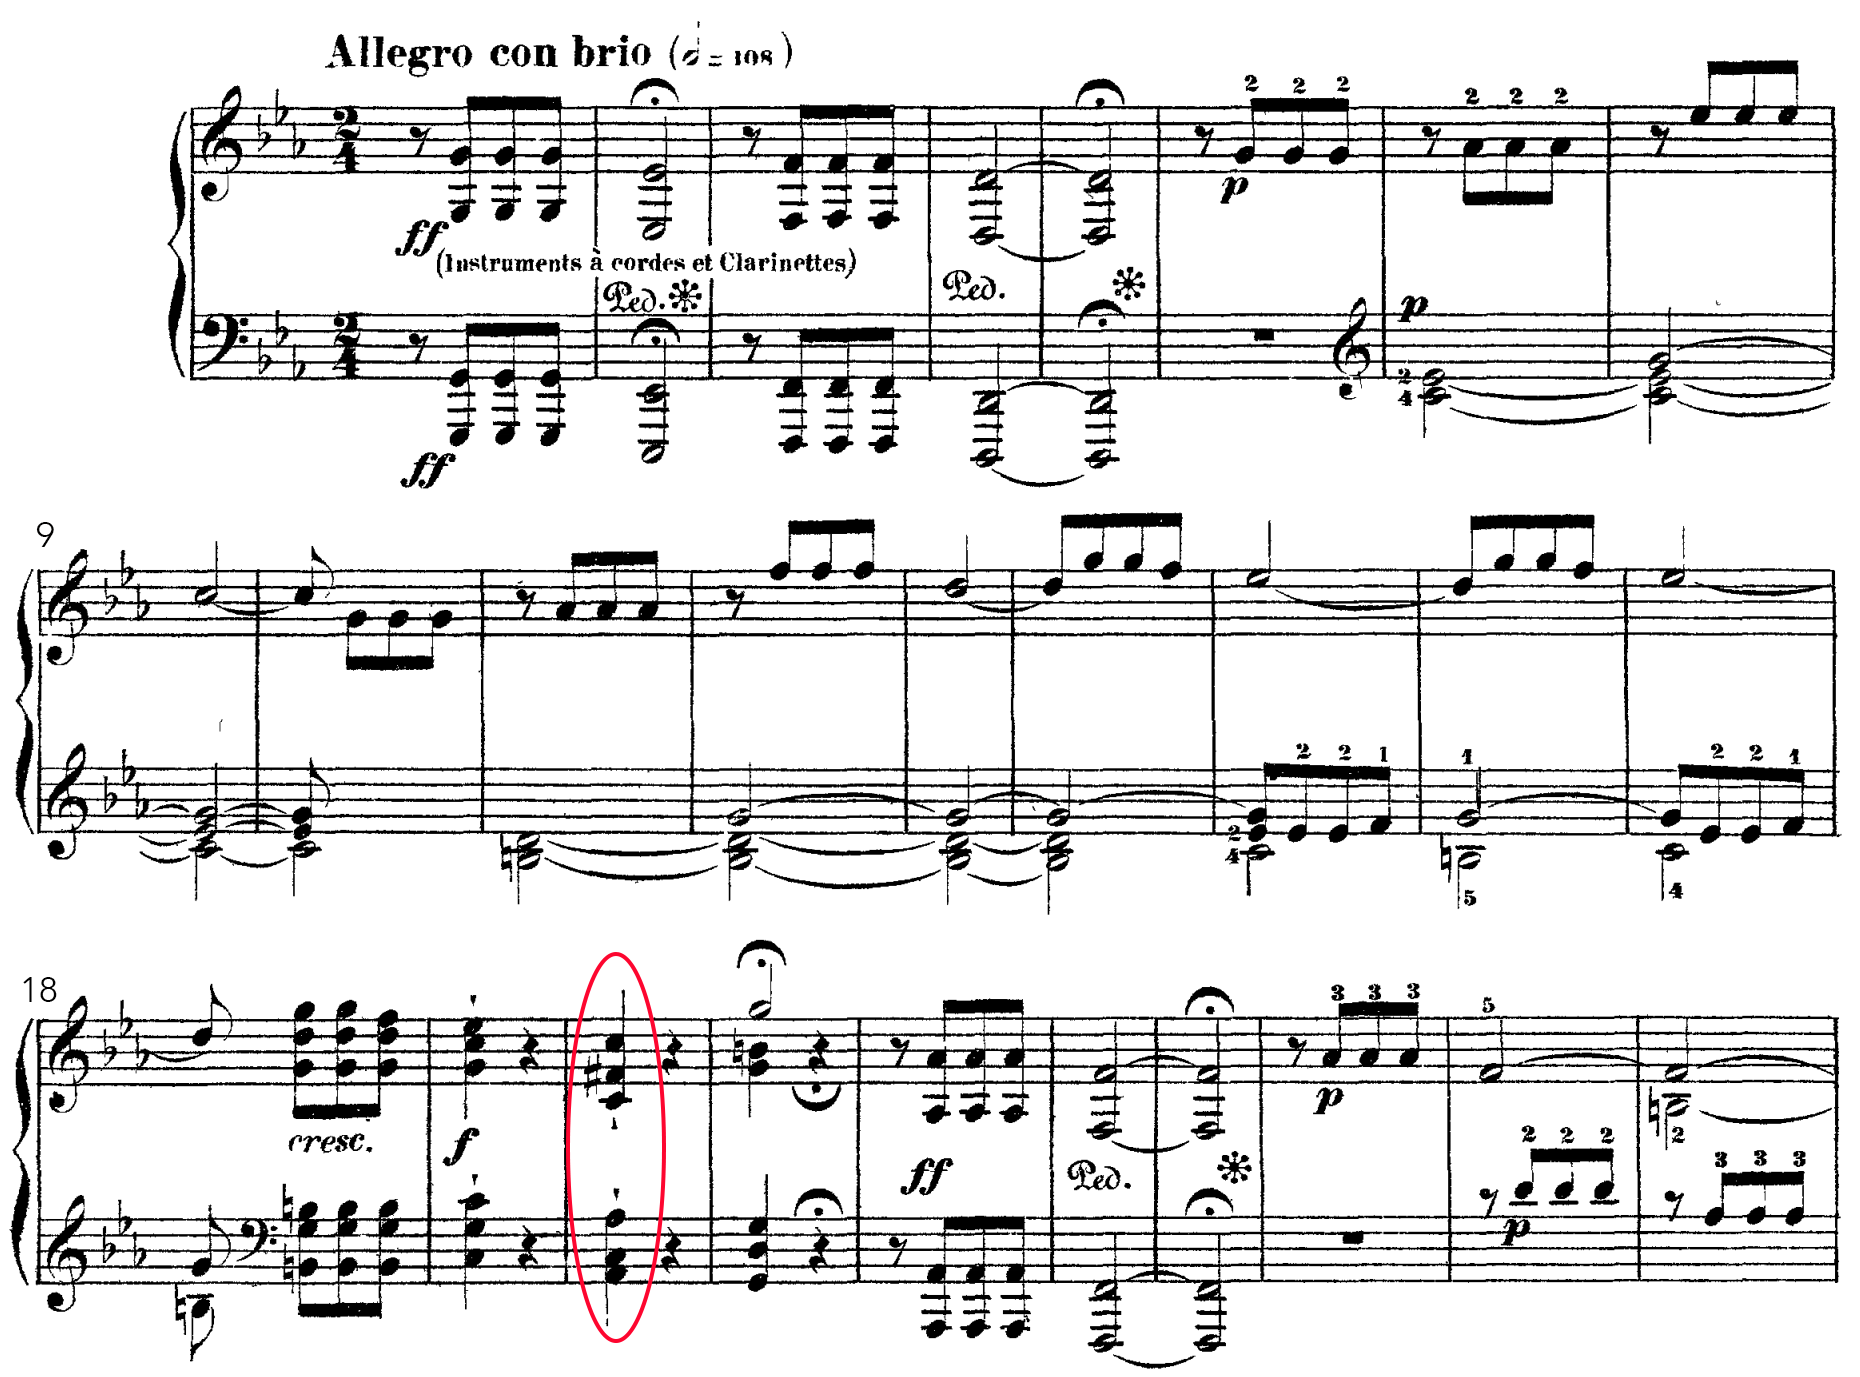 Image of the opening of Beethoven's Fifth Symphony, highlighting the Italian augmented-sixth chord in measure 20, at the end of the opening sentence.